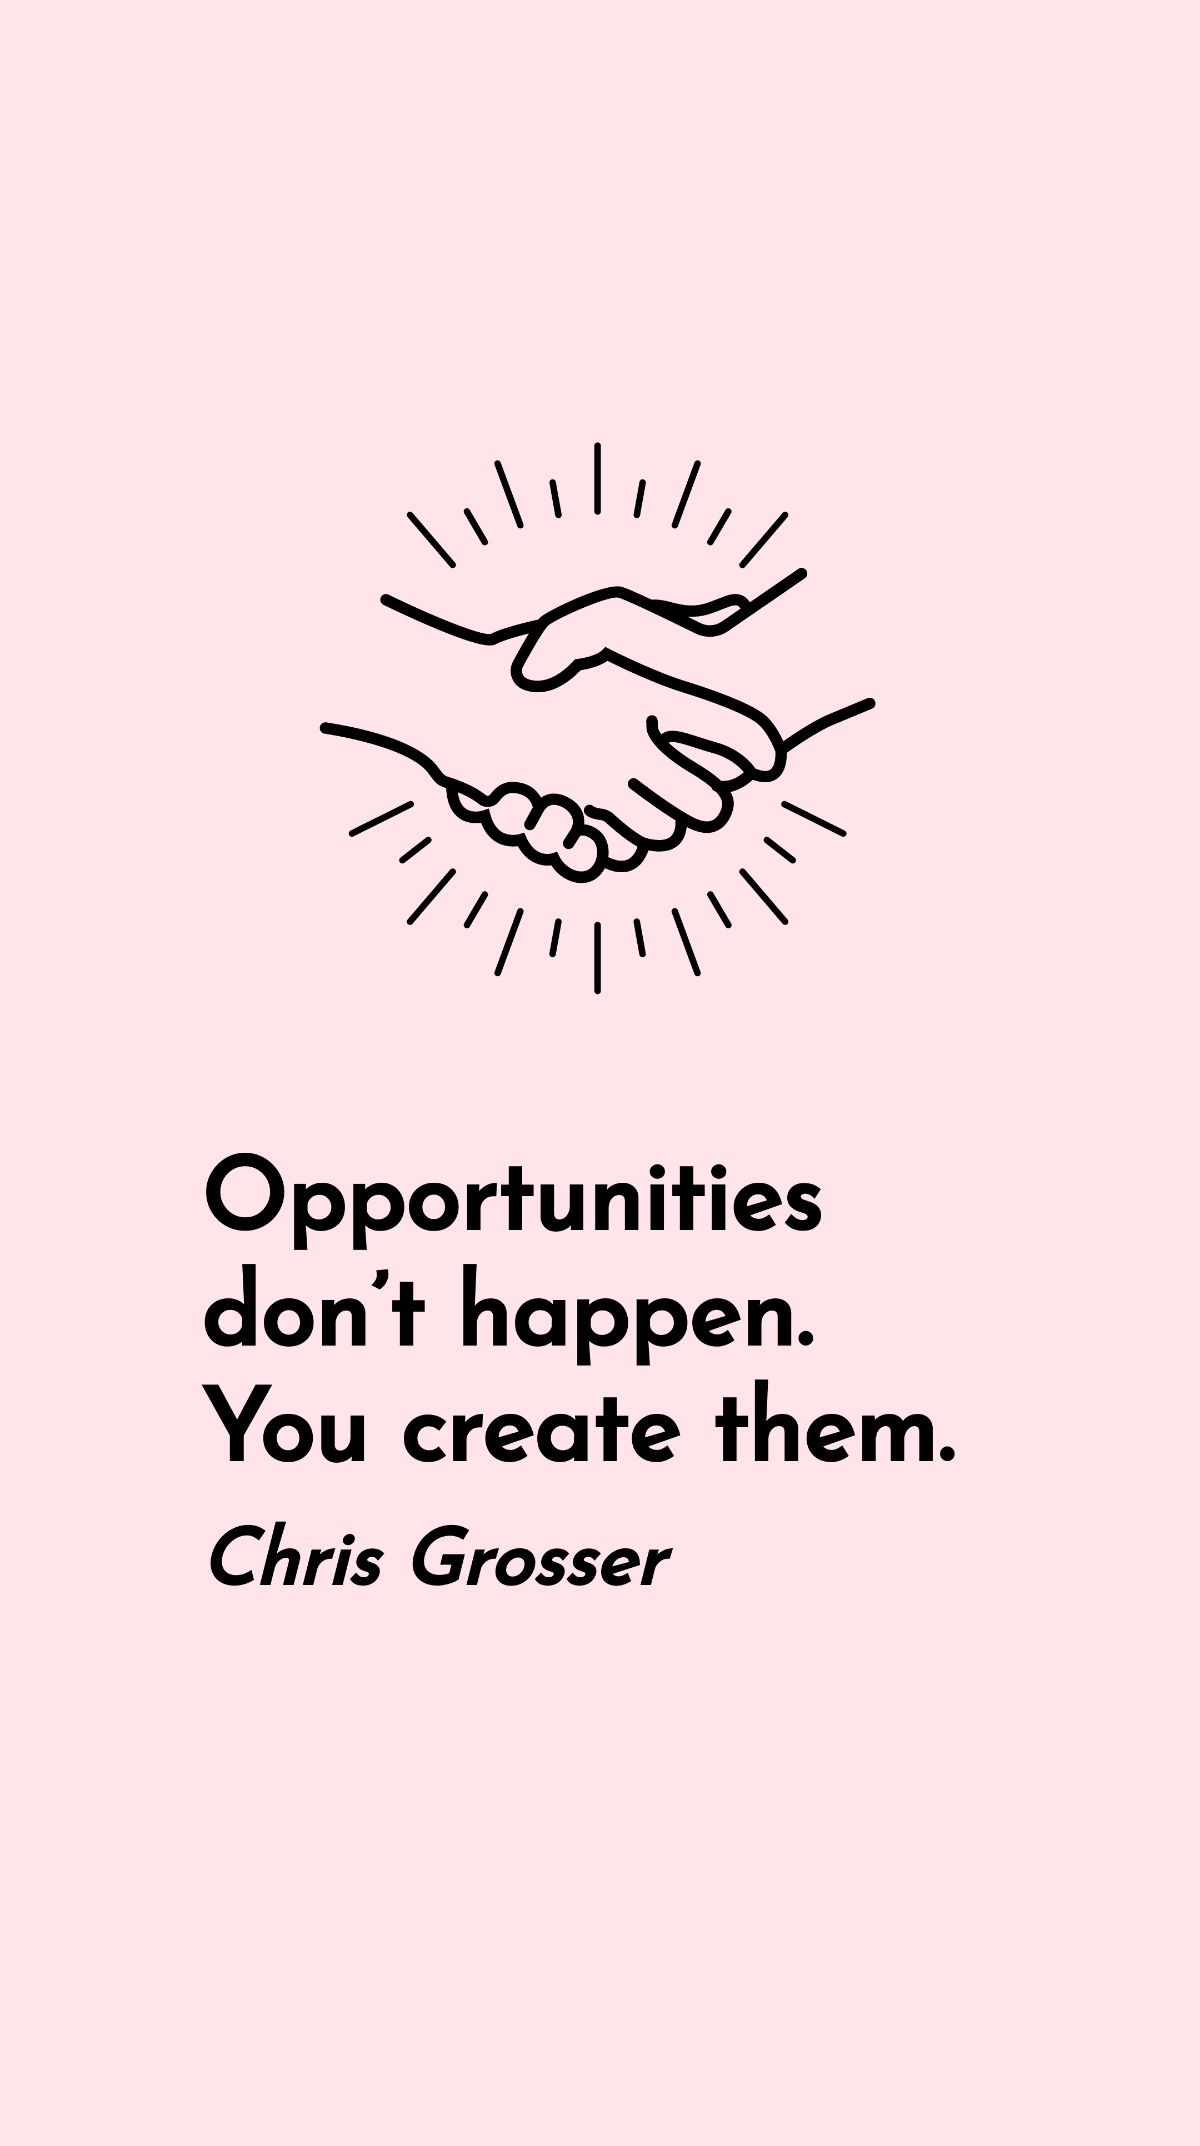 Free Chris Grosser - Opportunities don’t happen. You create them. Template